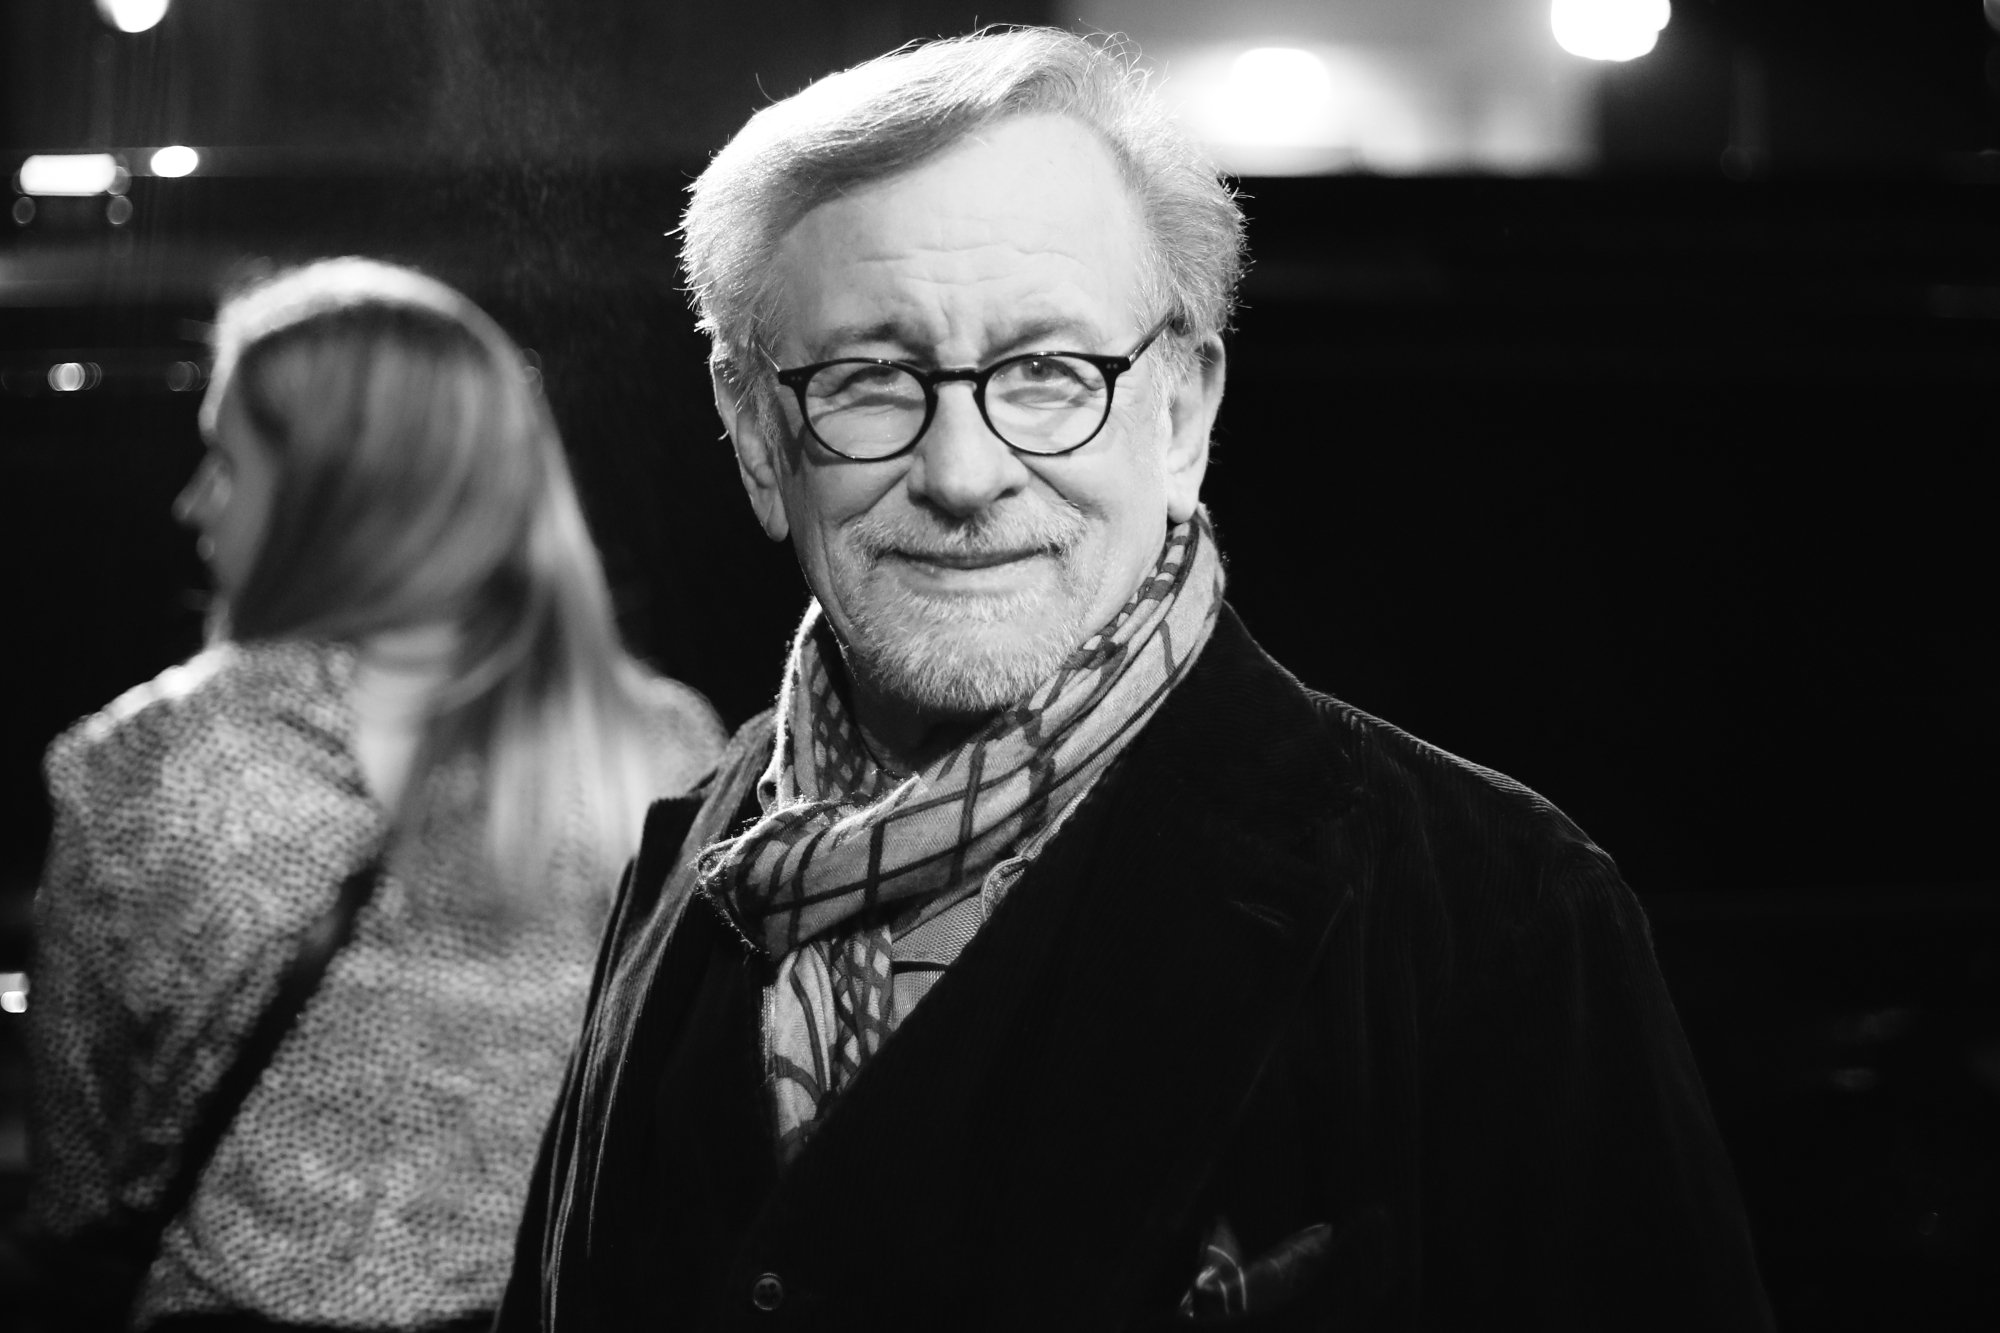 Featured image about Steven Spielberg Universal Studios Lot wearing a black coat and a scarf in black-and-white